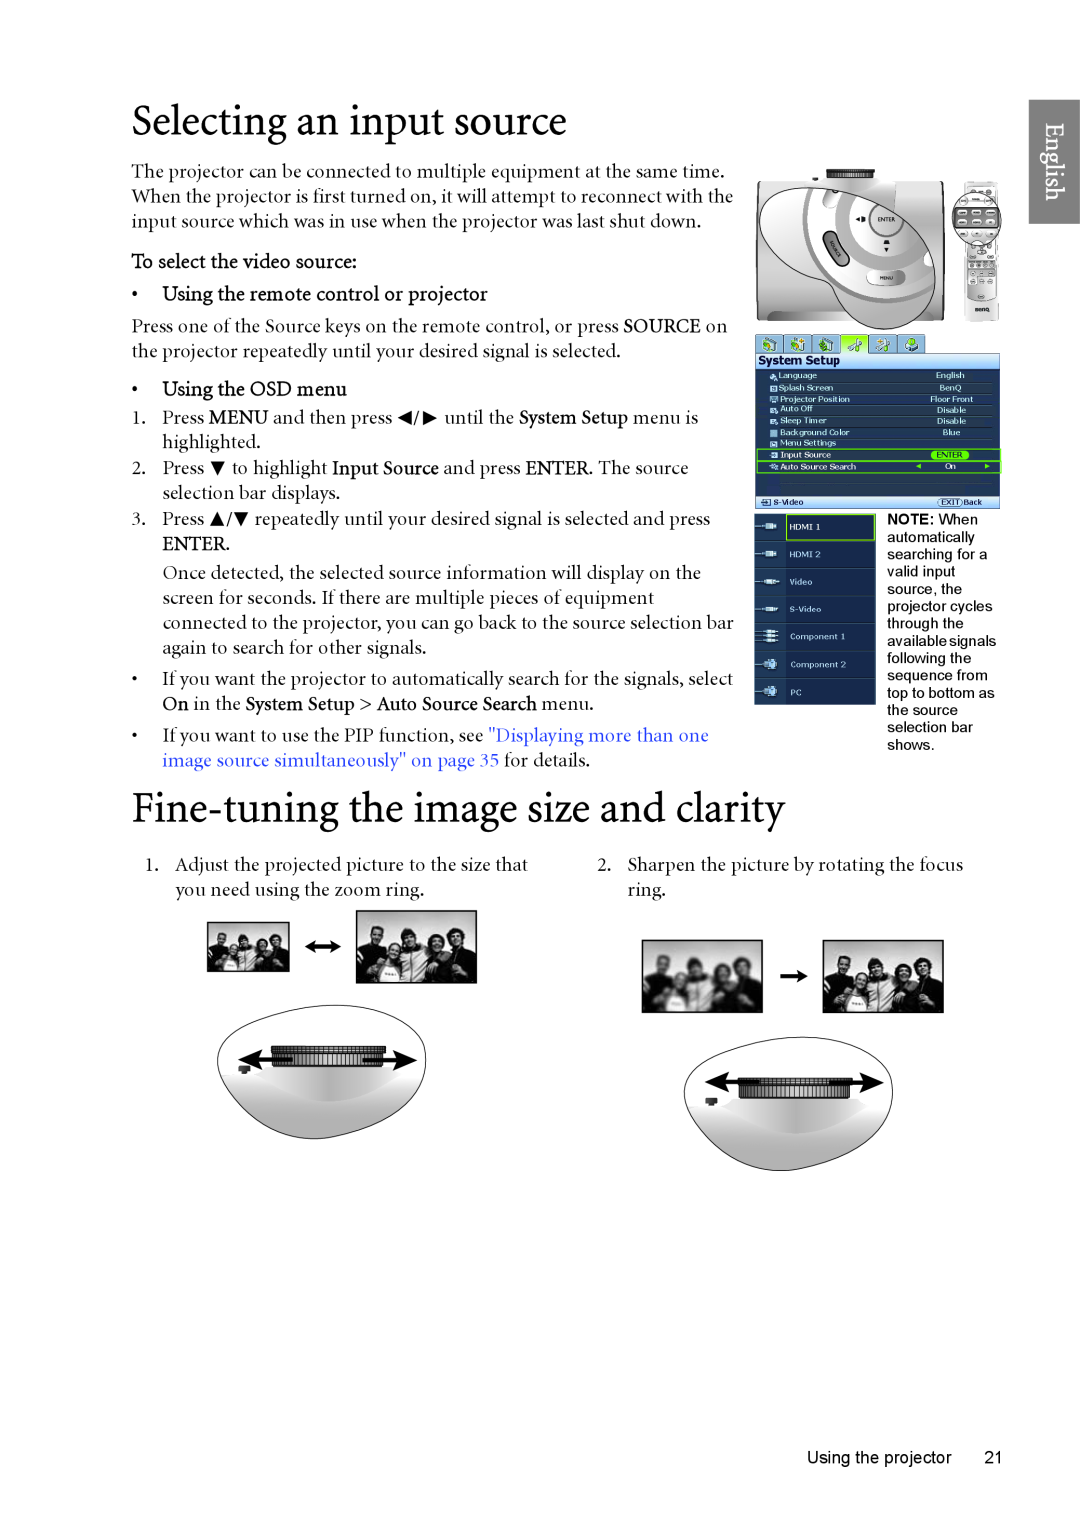 BenQ W6500 Selecting an input source, Fine-tuning the image size and clarity, English, Using the OSD menu, Enter 